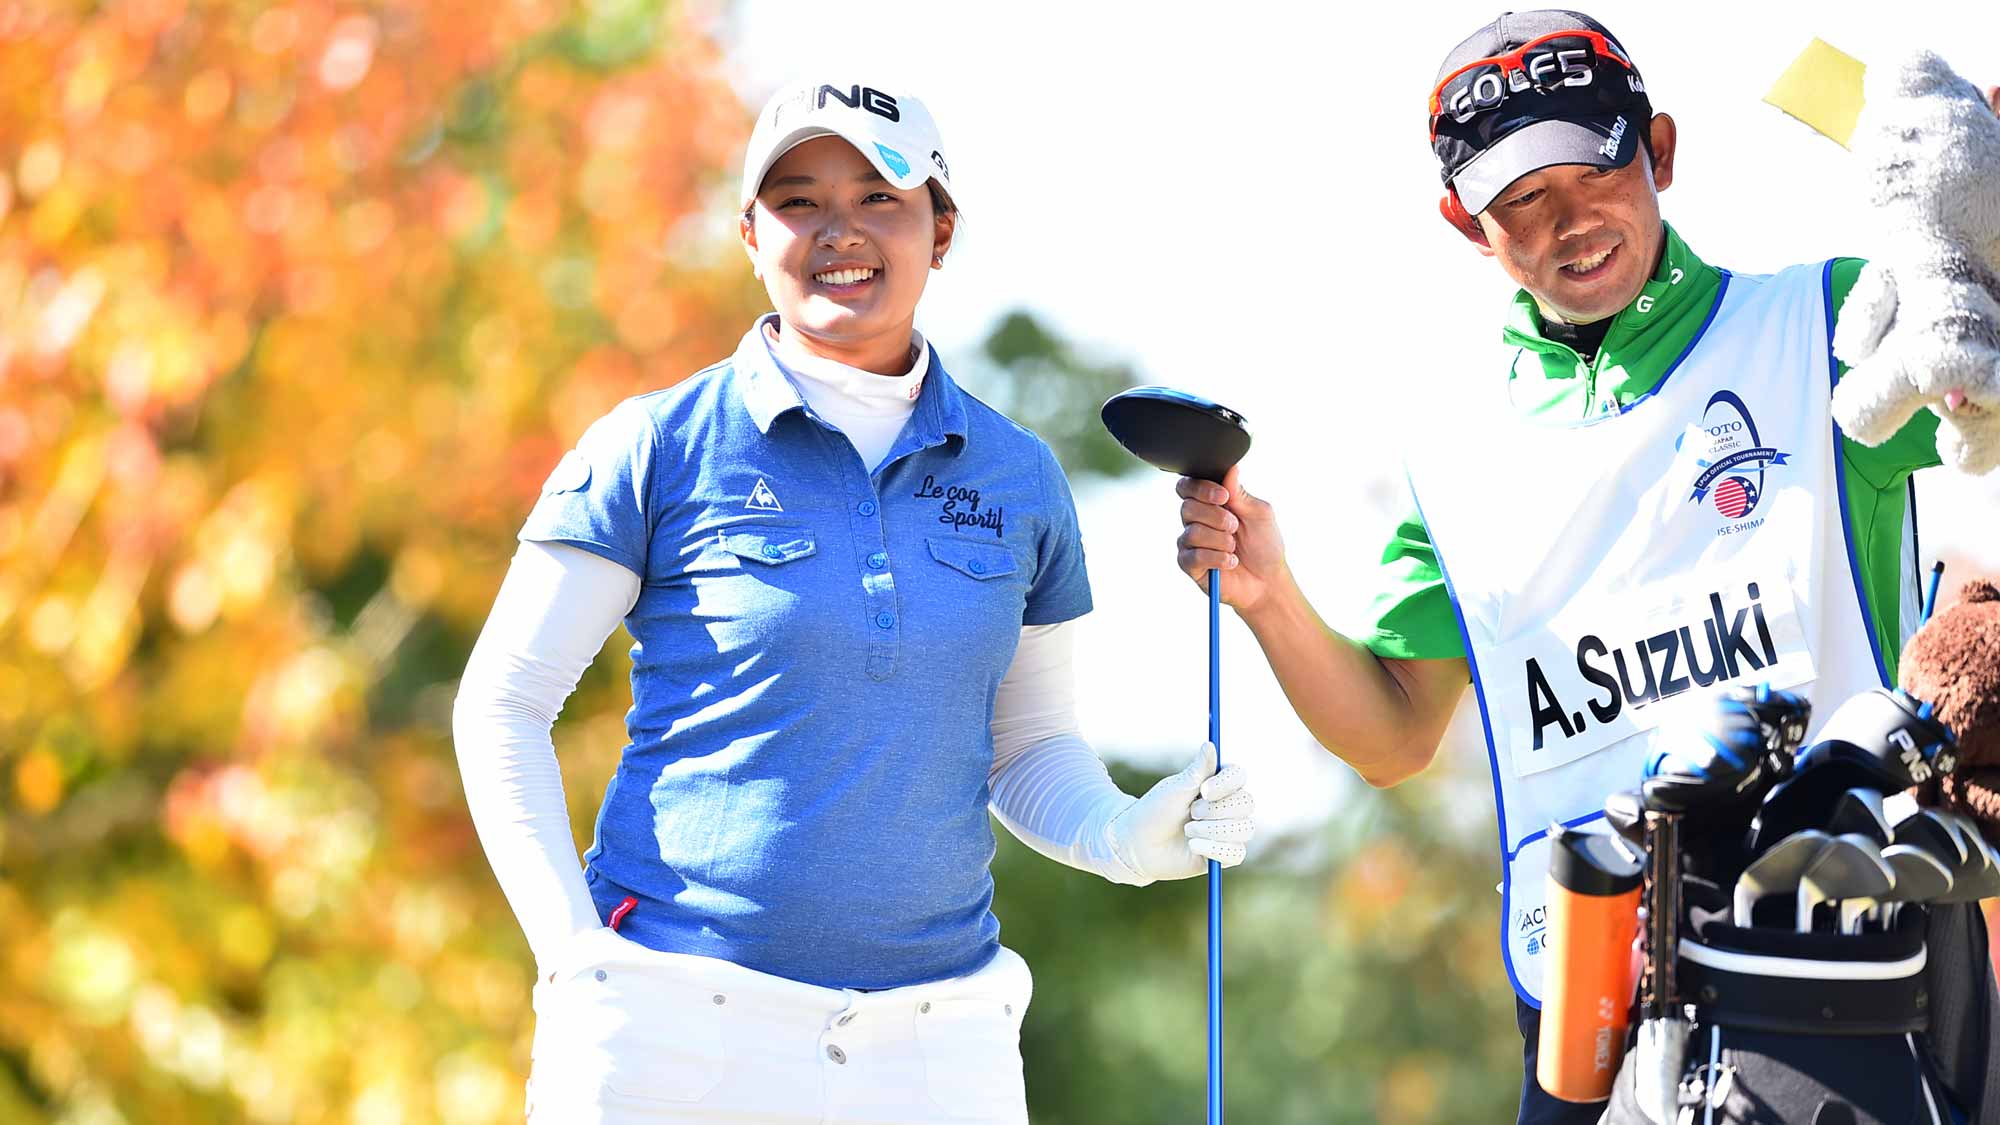 Ai Suzuki of Japan smiles during the first round of the TOTO JAPAN CLASSIC 2015 at the Kintetsu Kashikojima Country Club